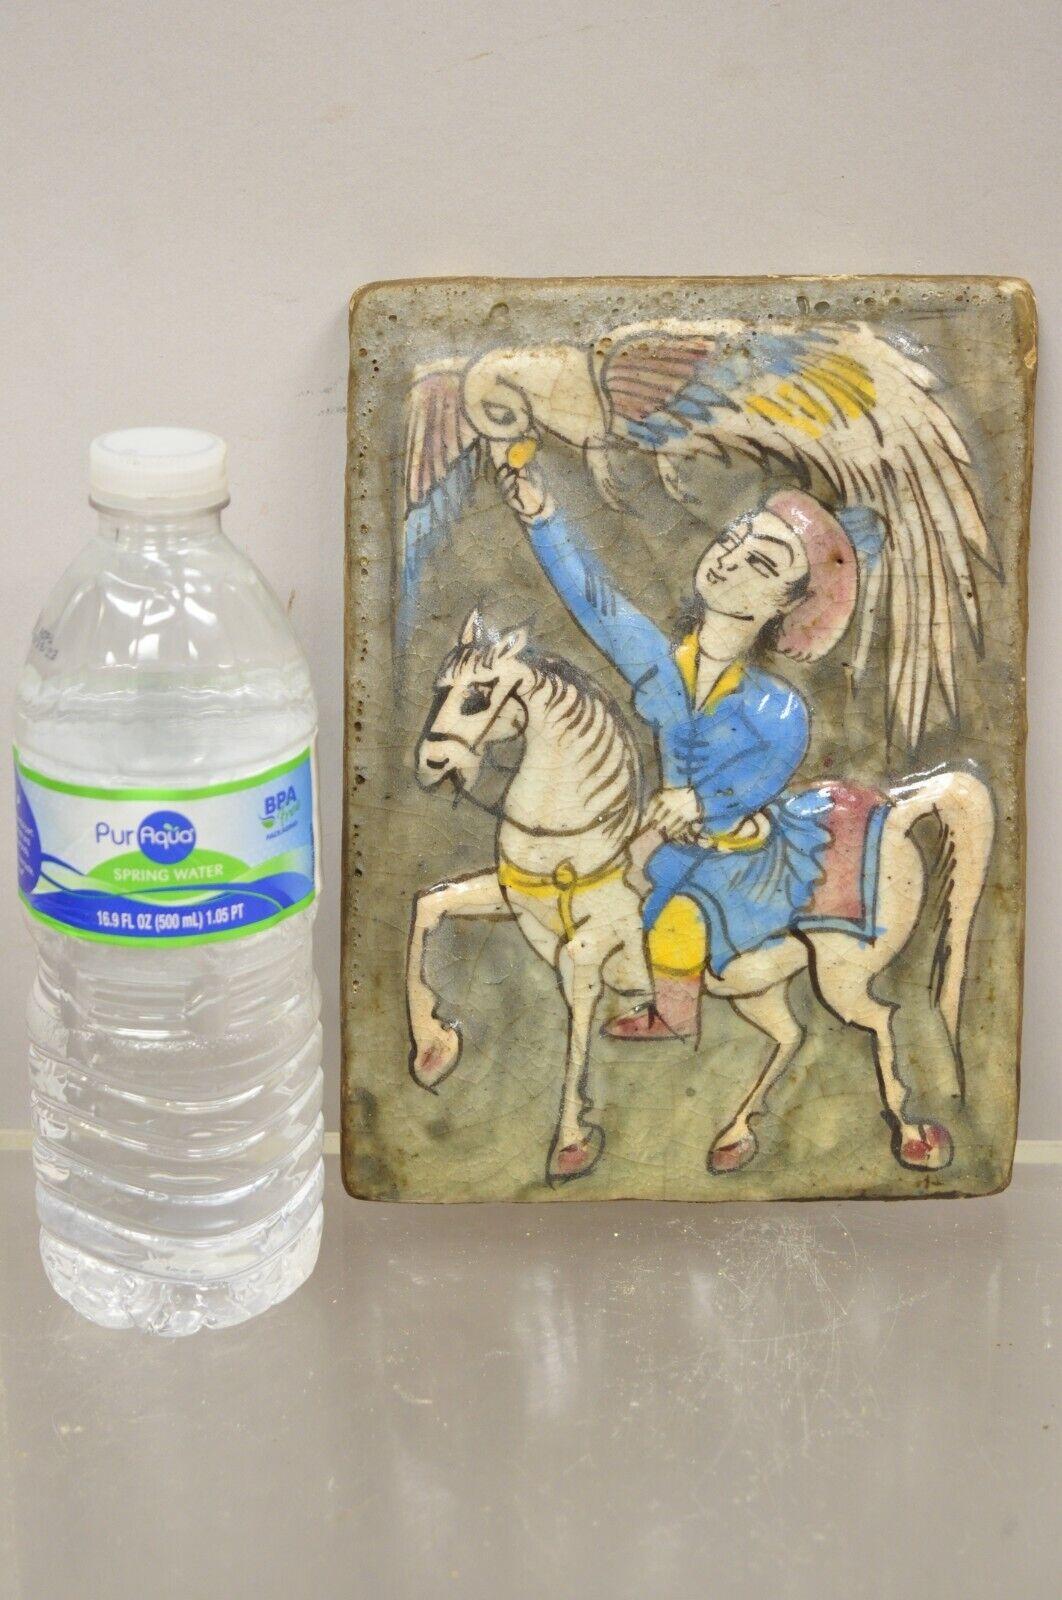 Antique Persian Iznik Qajar Style Ceramic Pottery Tile Horse Rider and Bird C4. Item features original crackle glazed finish, heavy ceramic pottery construction, very impressive detail, wonderful style and form. Great to mount as wall art or accent